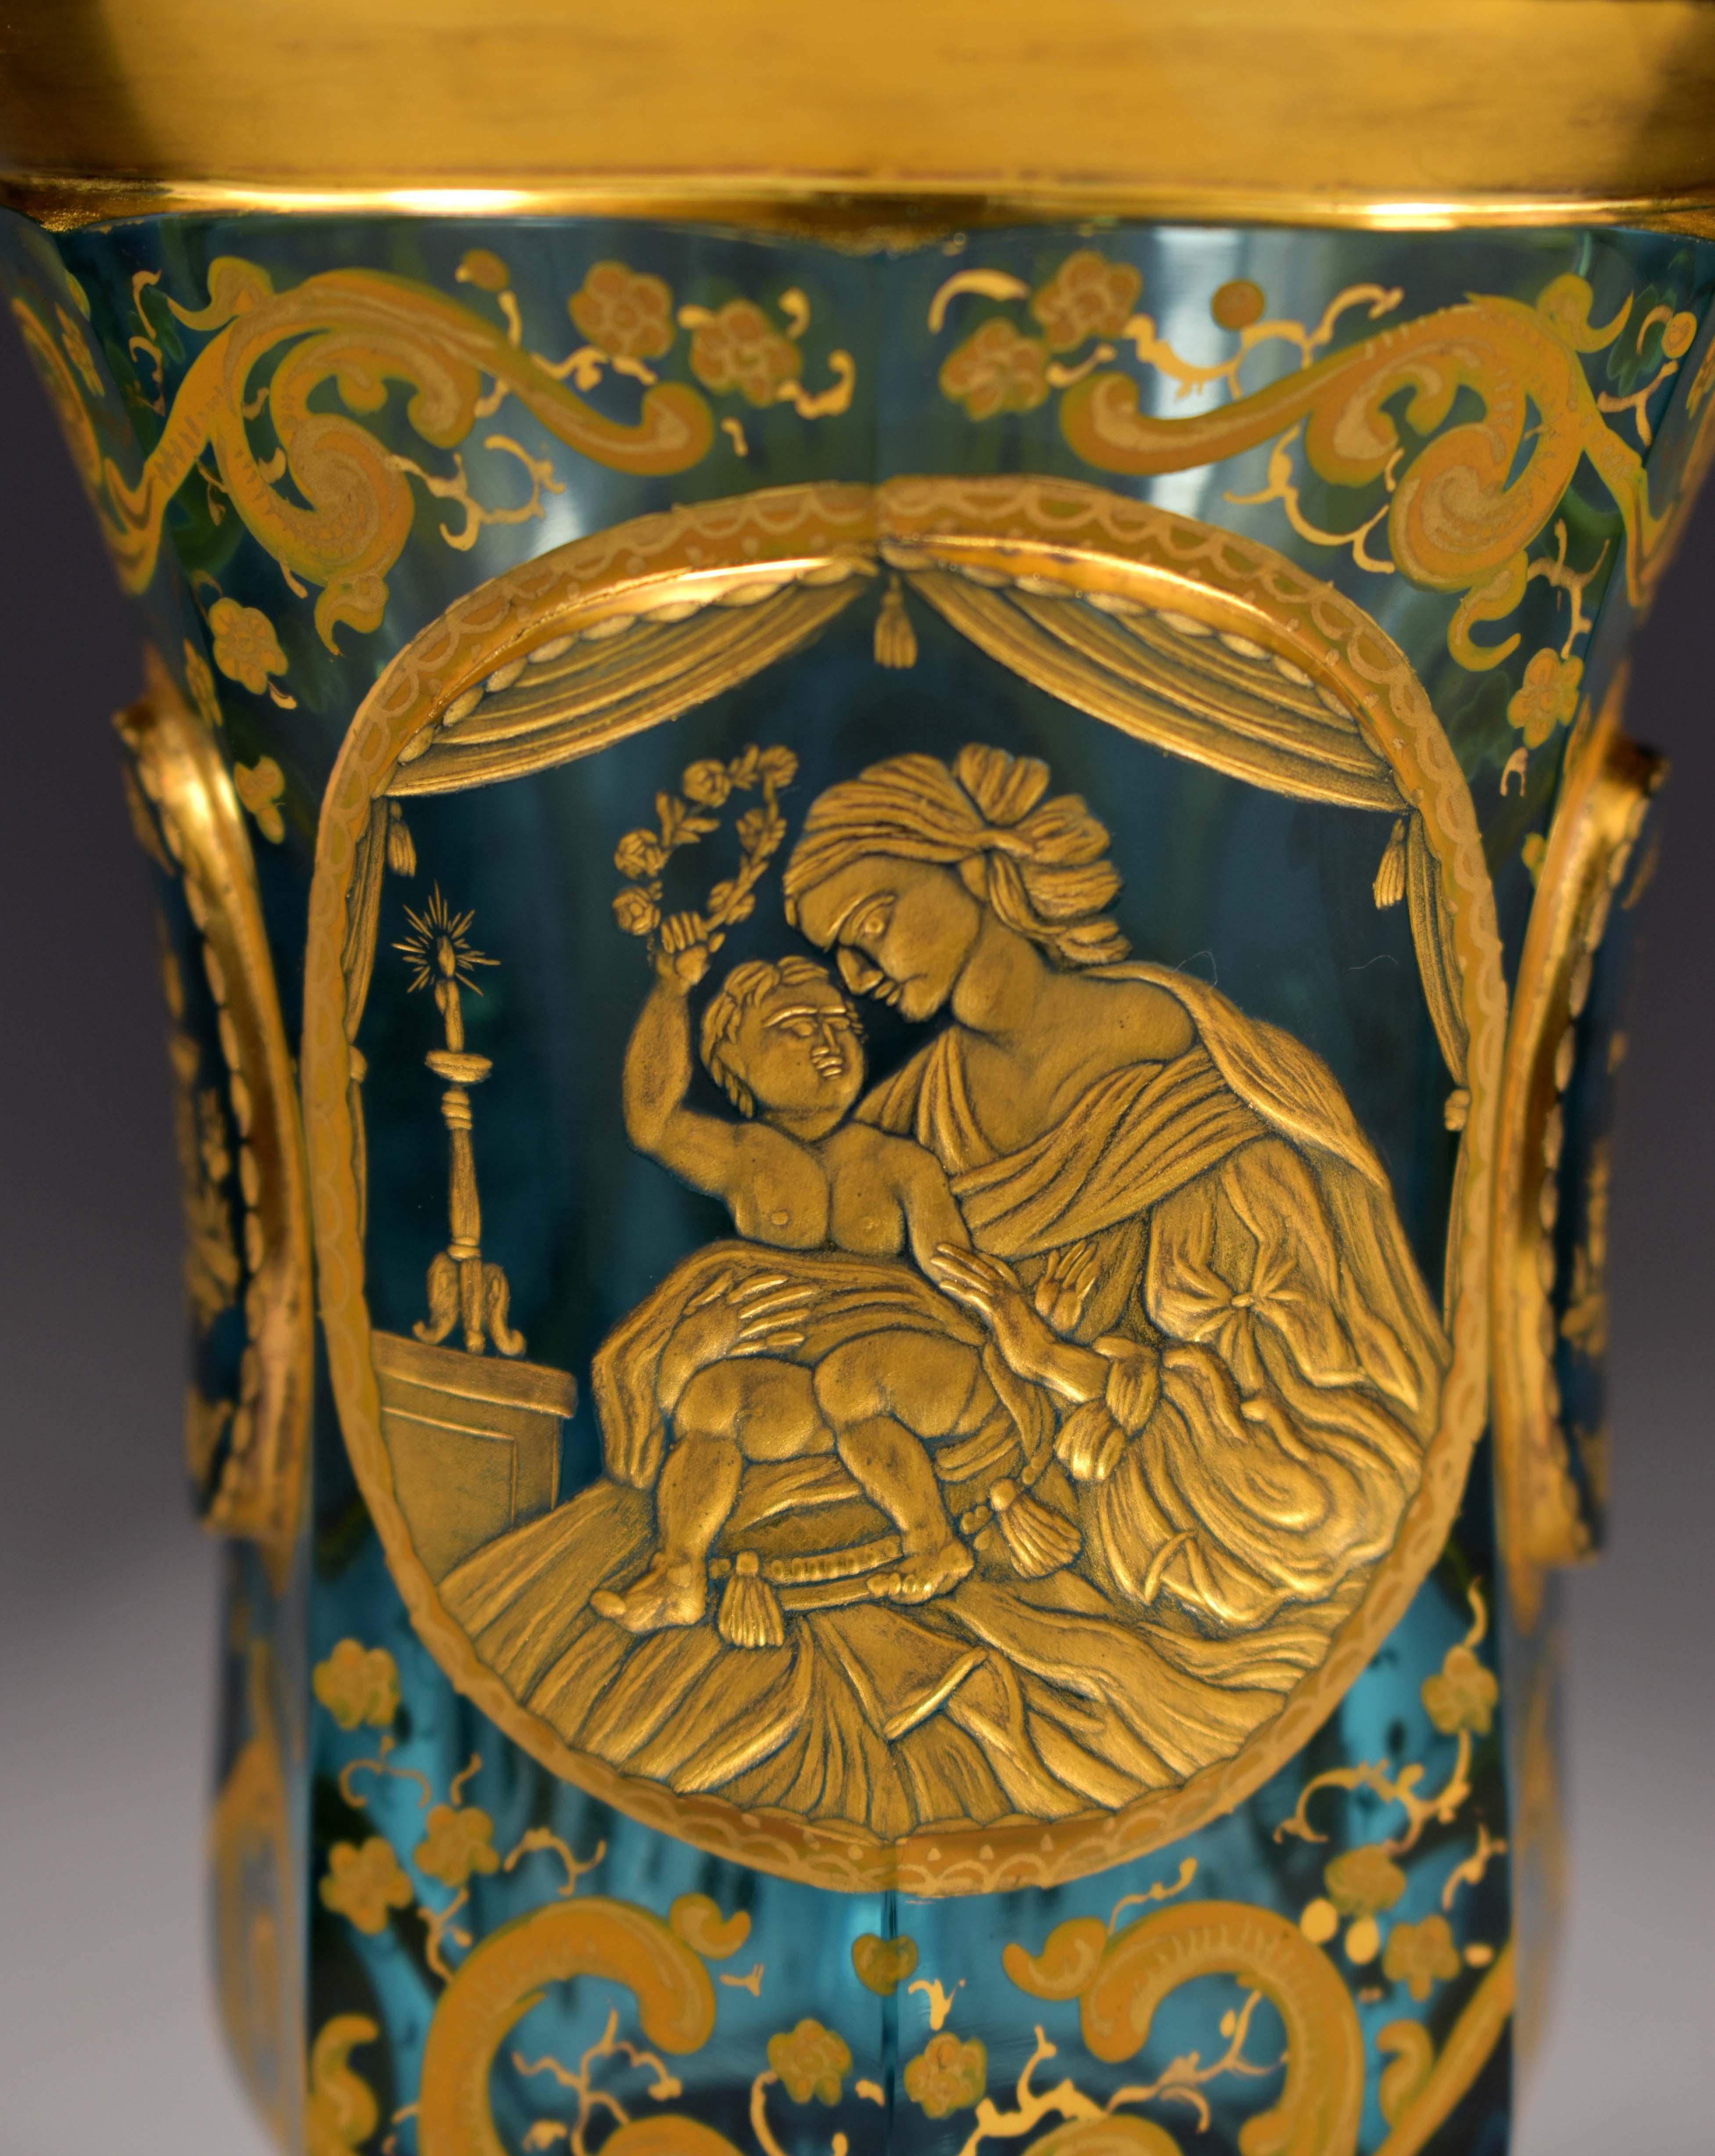 Glass Goblet with a Gilded Engraving of Saint Mary with Jesus 19th Century